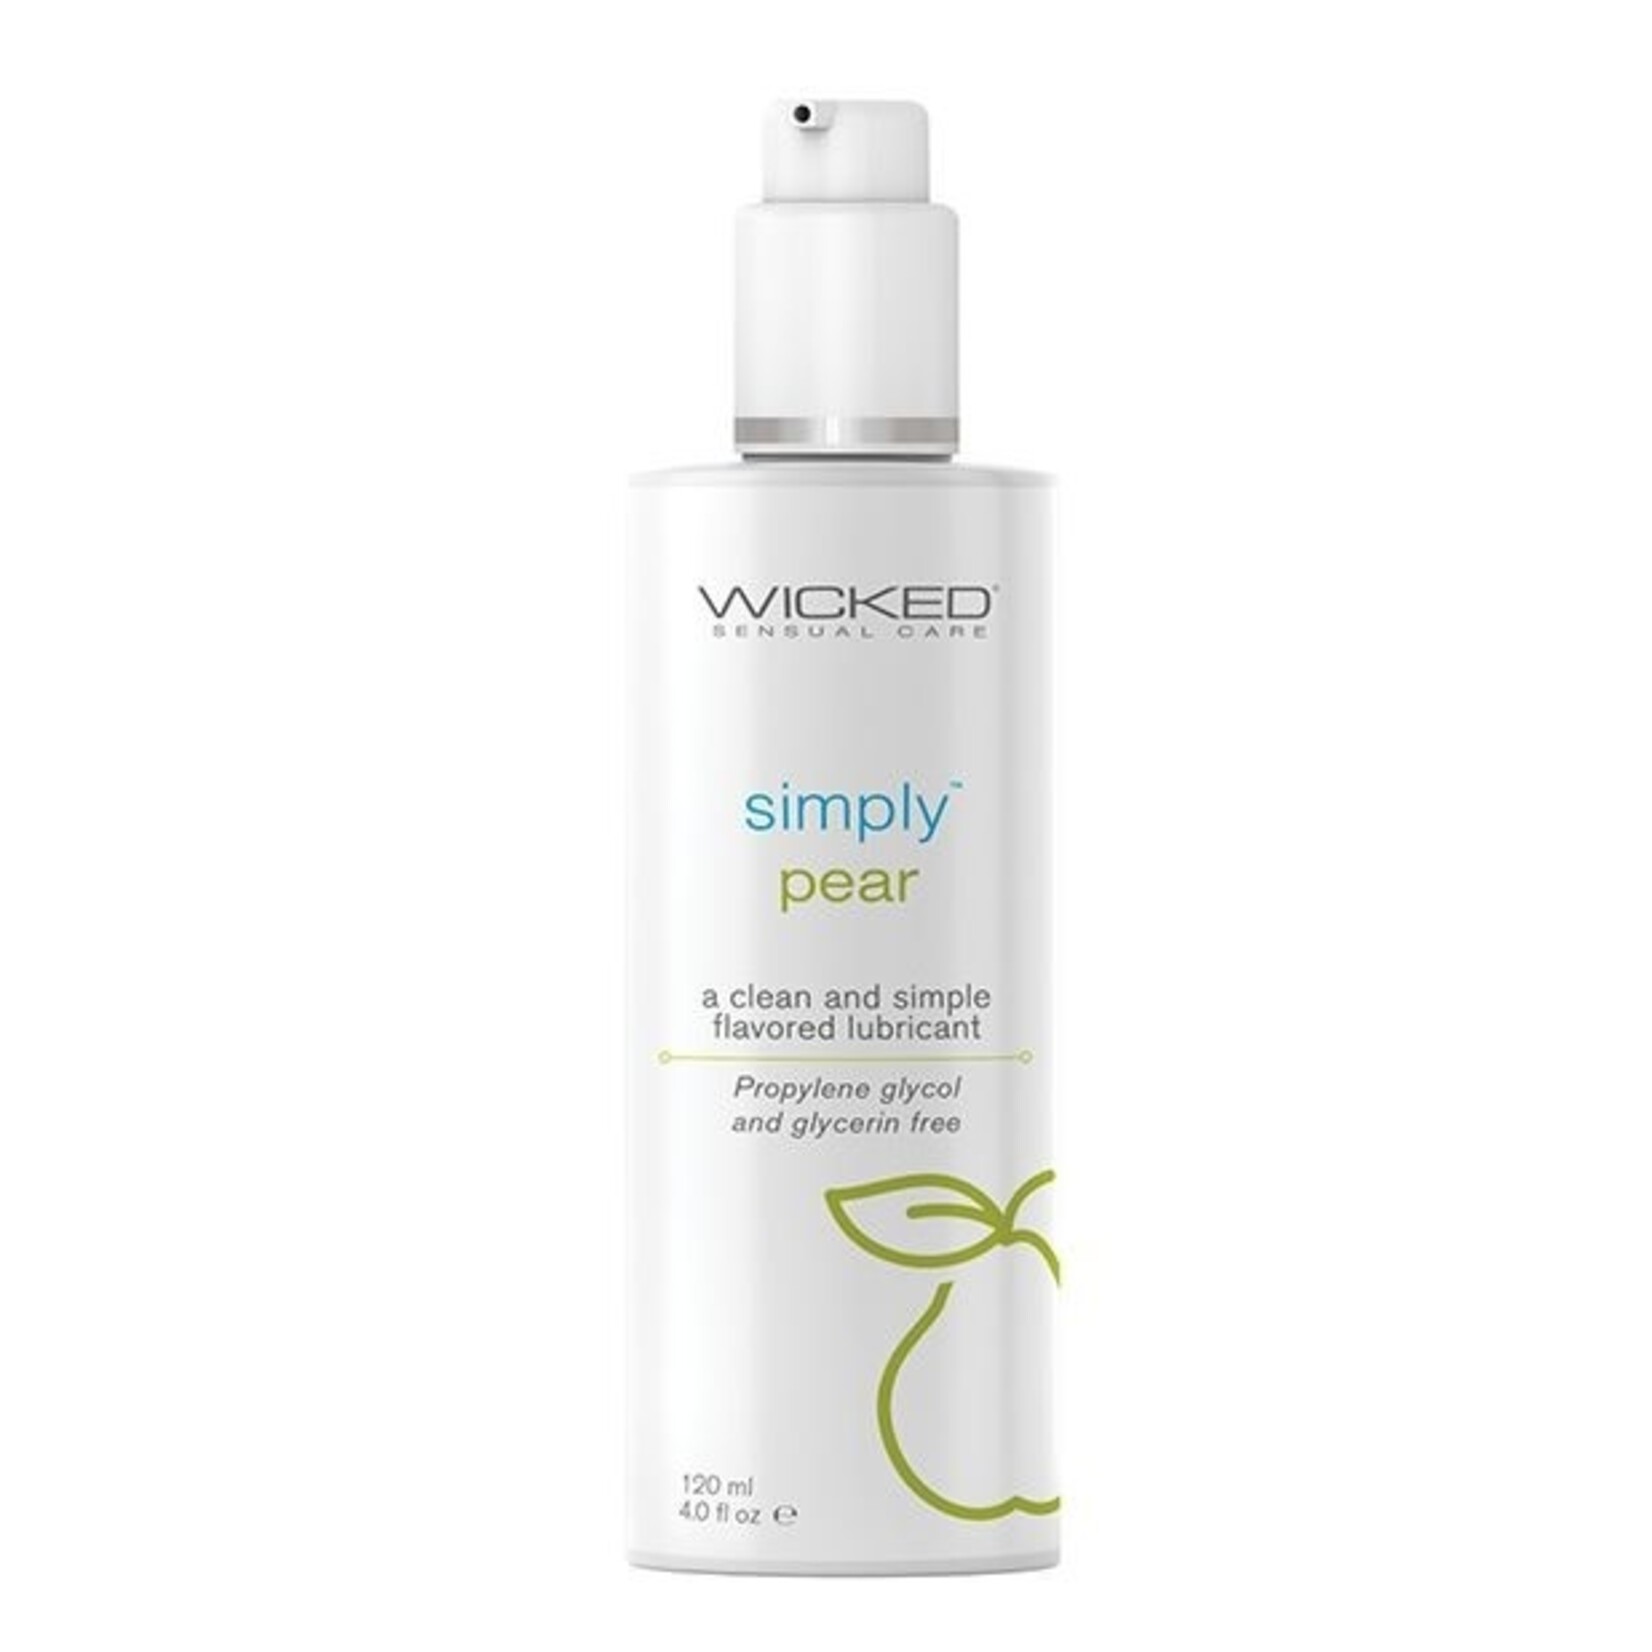 WICKED - SIMPLY PEAR FLAVORED LUBE 4OZ/120ML